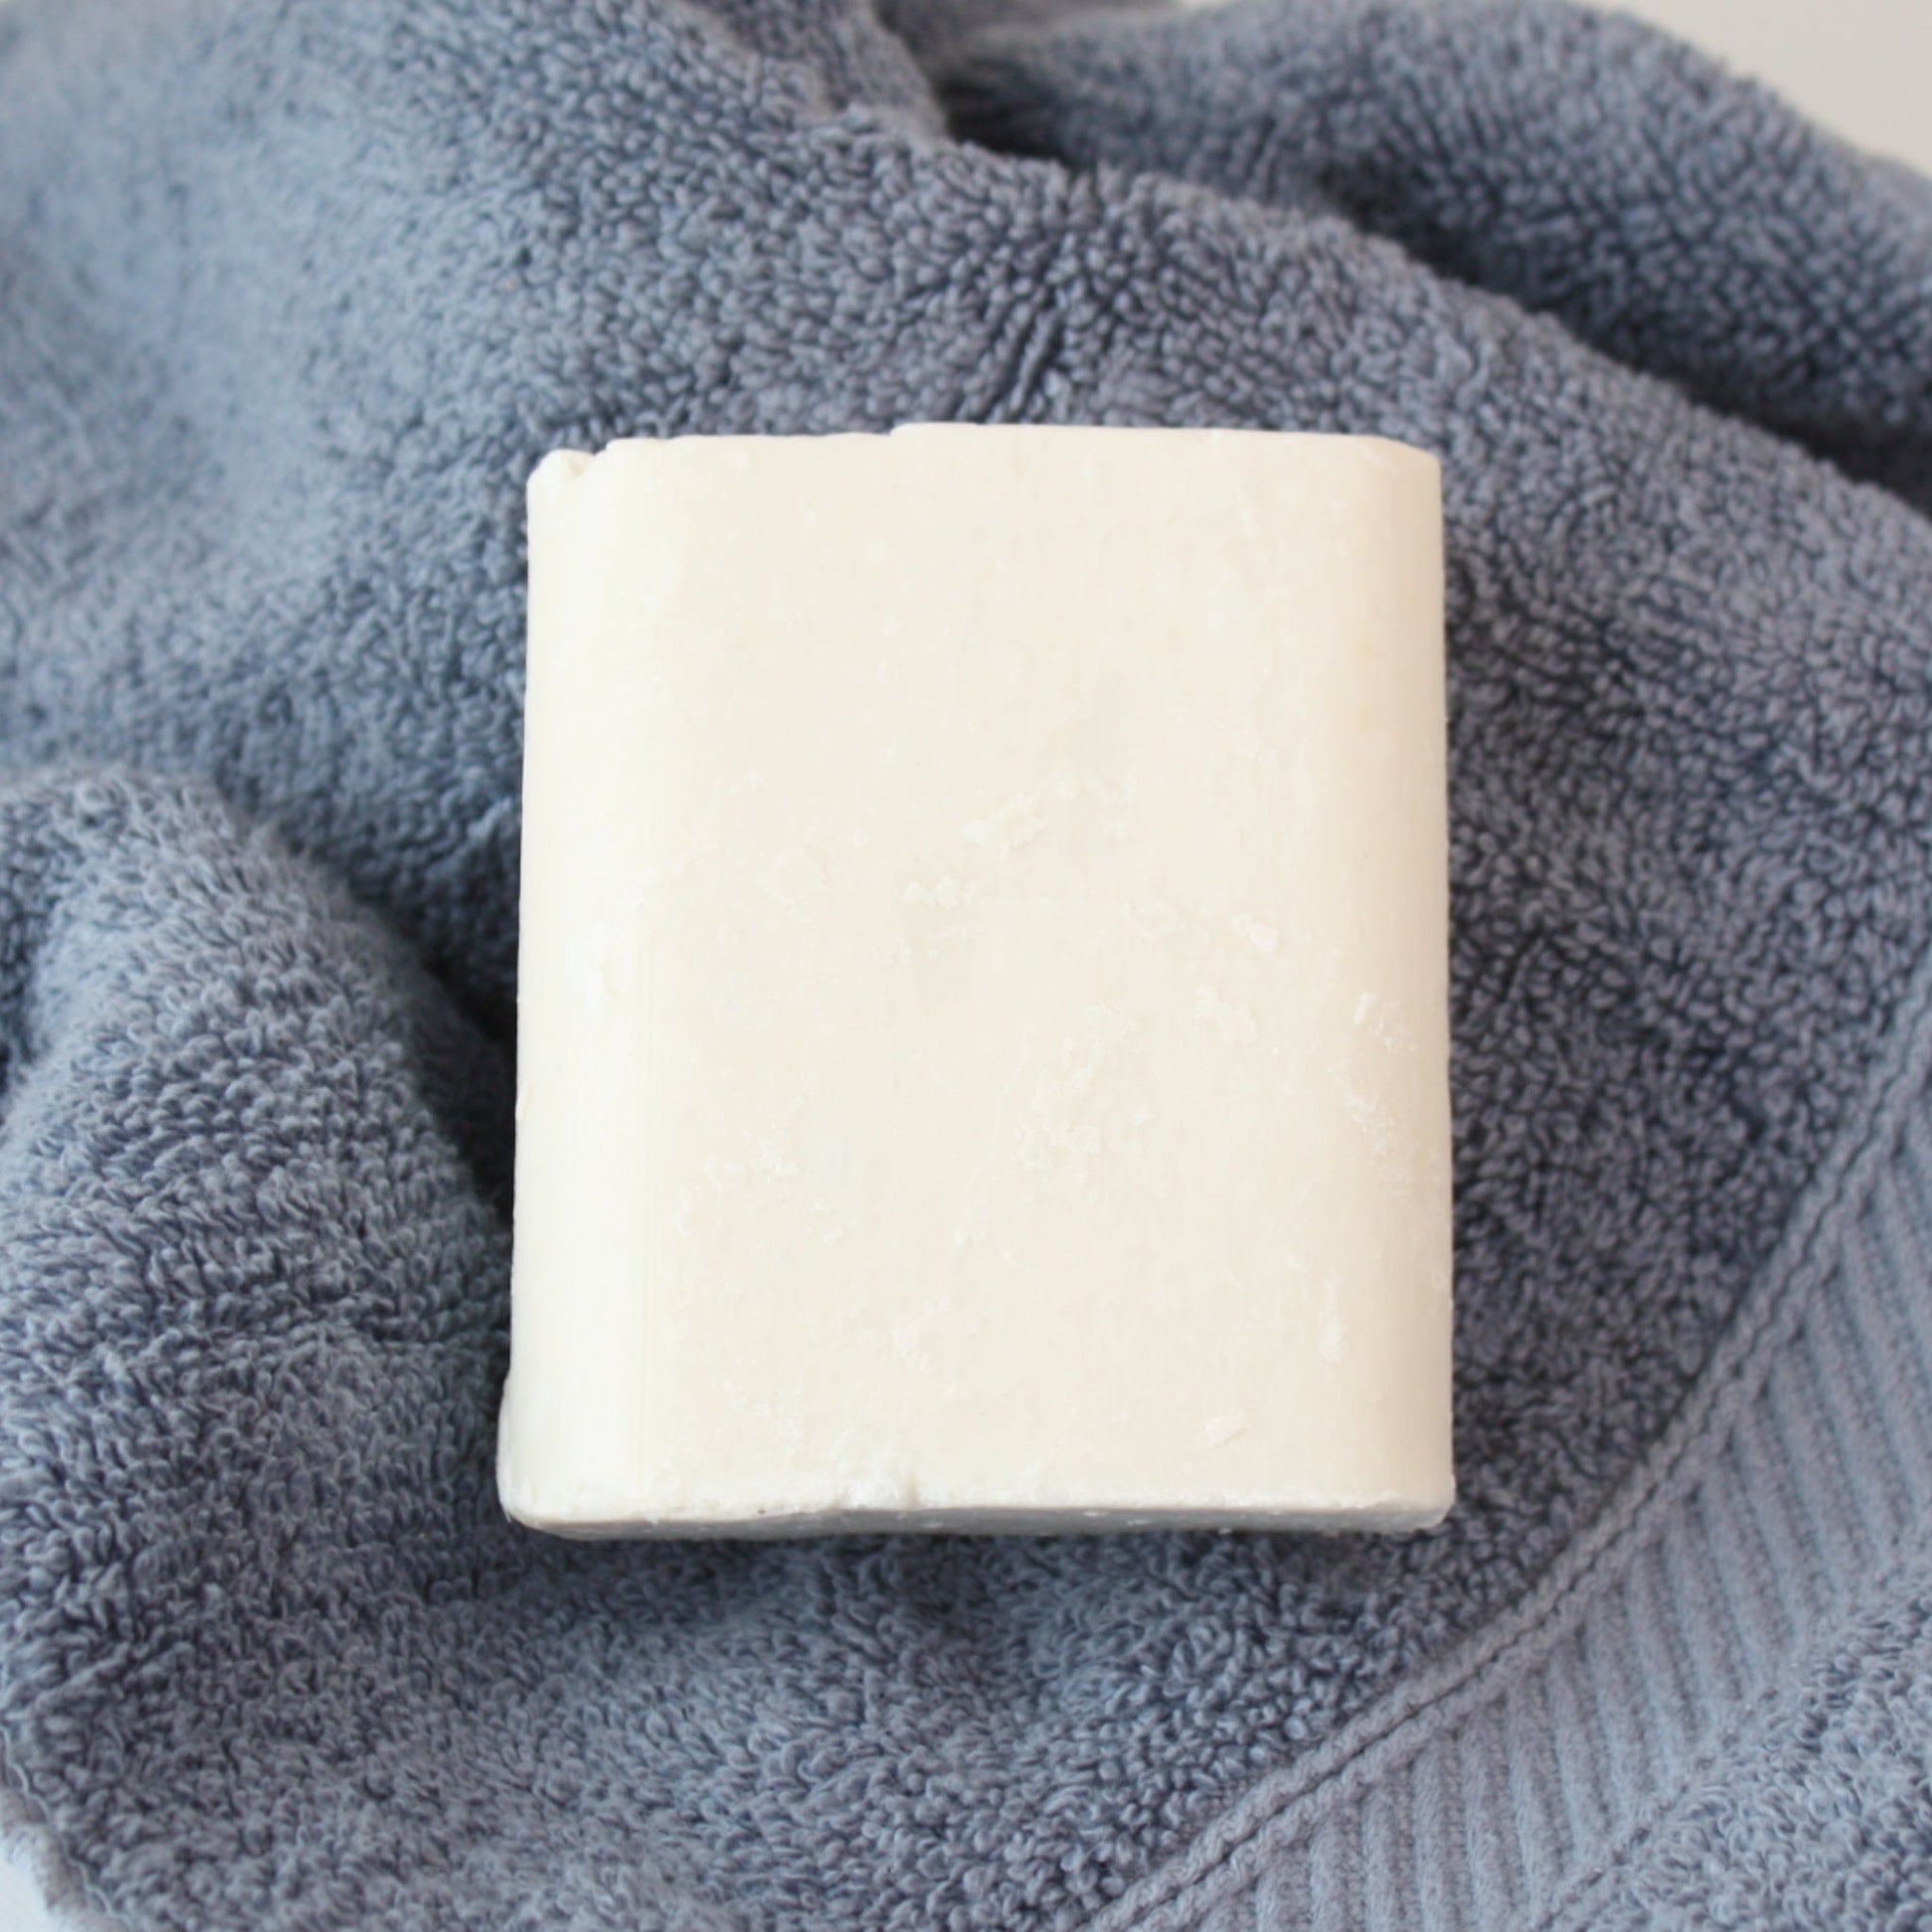 Amish Farms Soap - We are excited to launch our NEW Amish Farm Pet Soap to  our website! We all have sensitive skin so does our pets! Amish Farm Soap  has combined